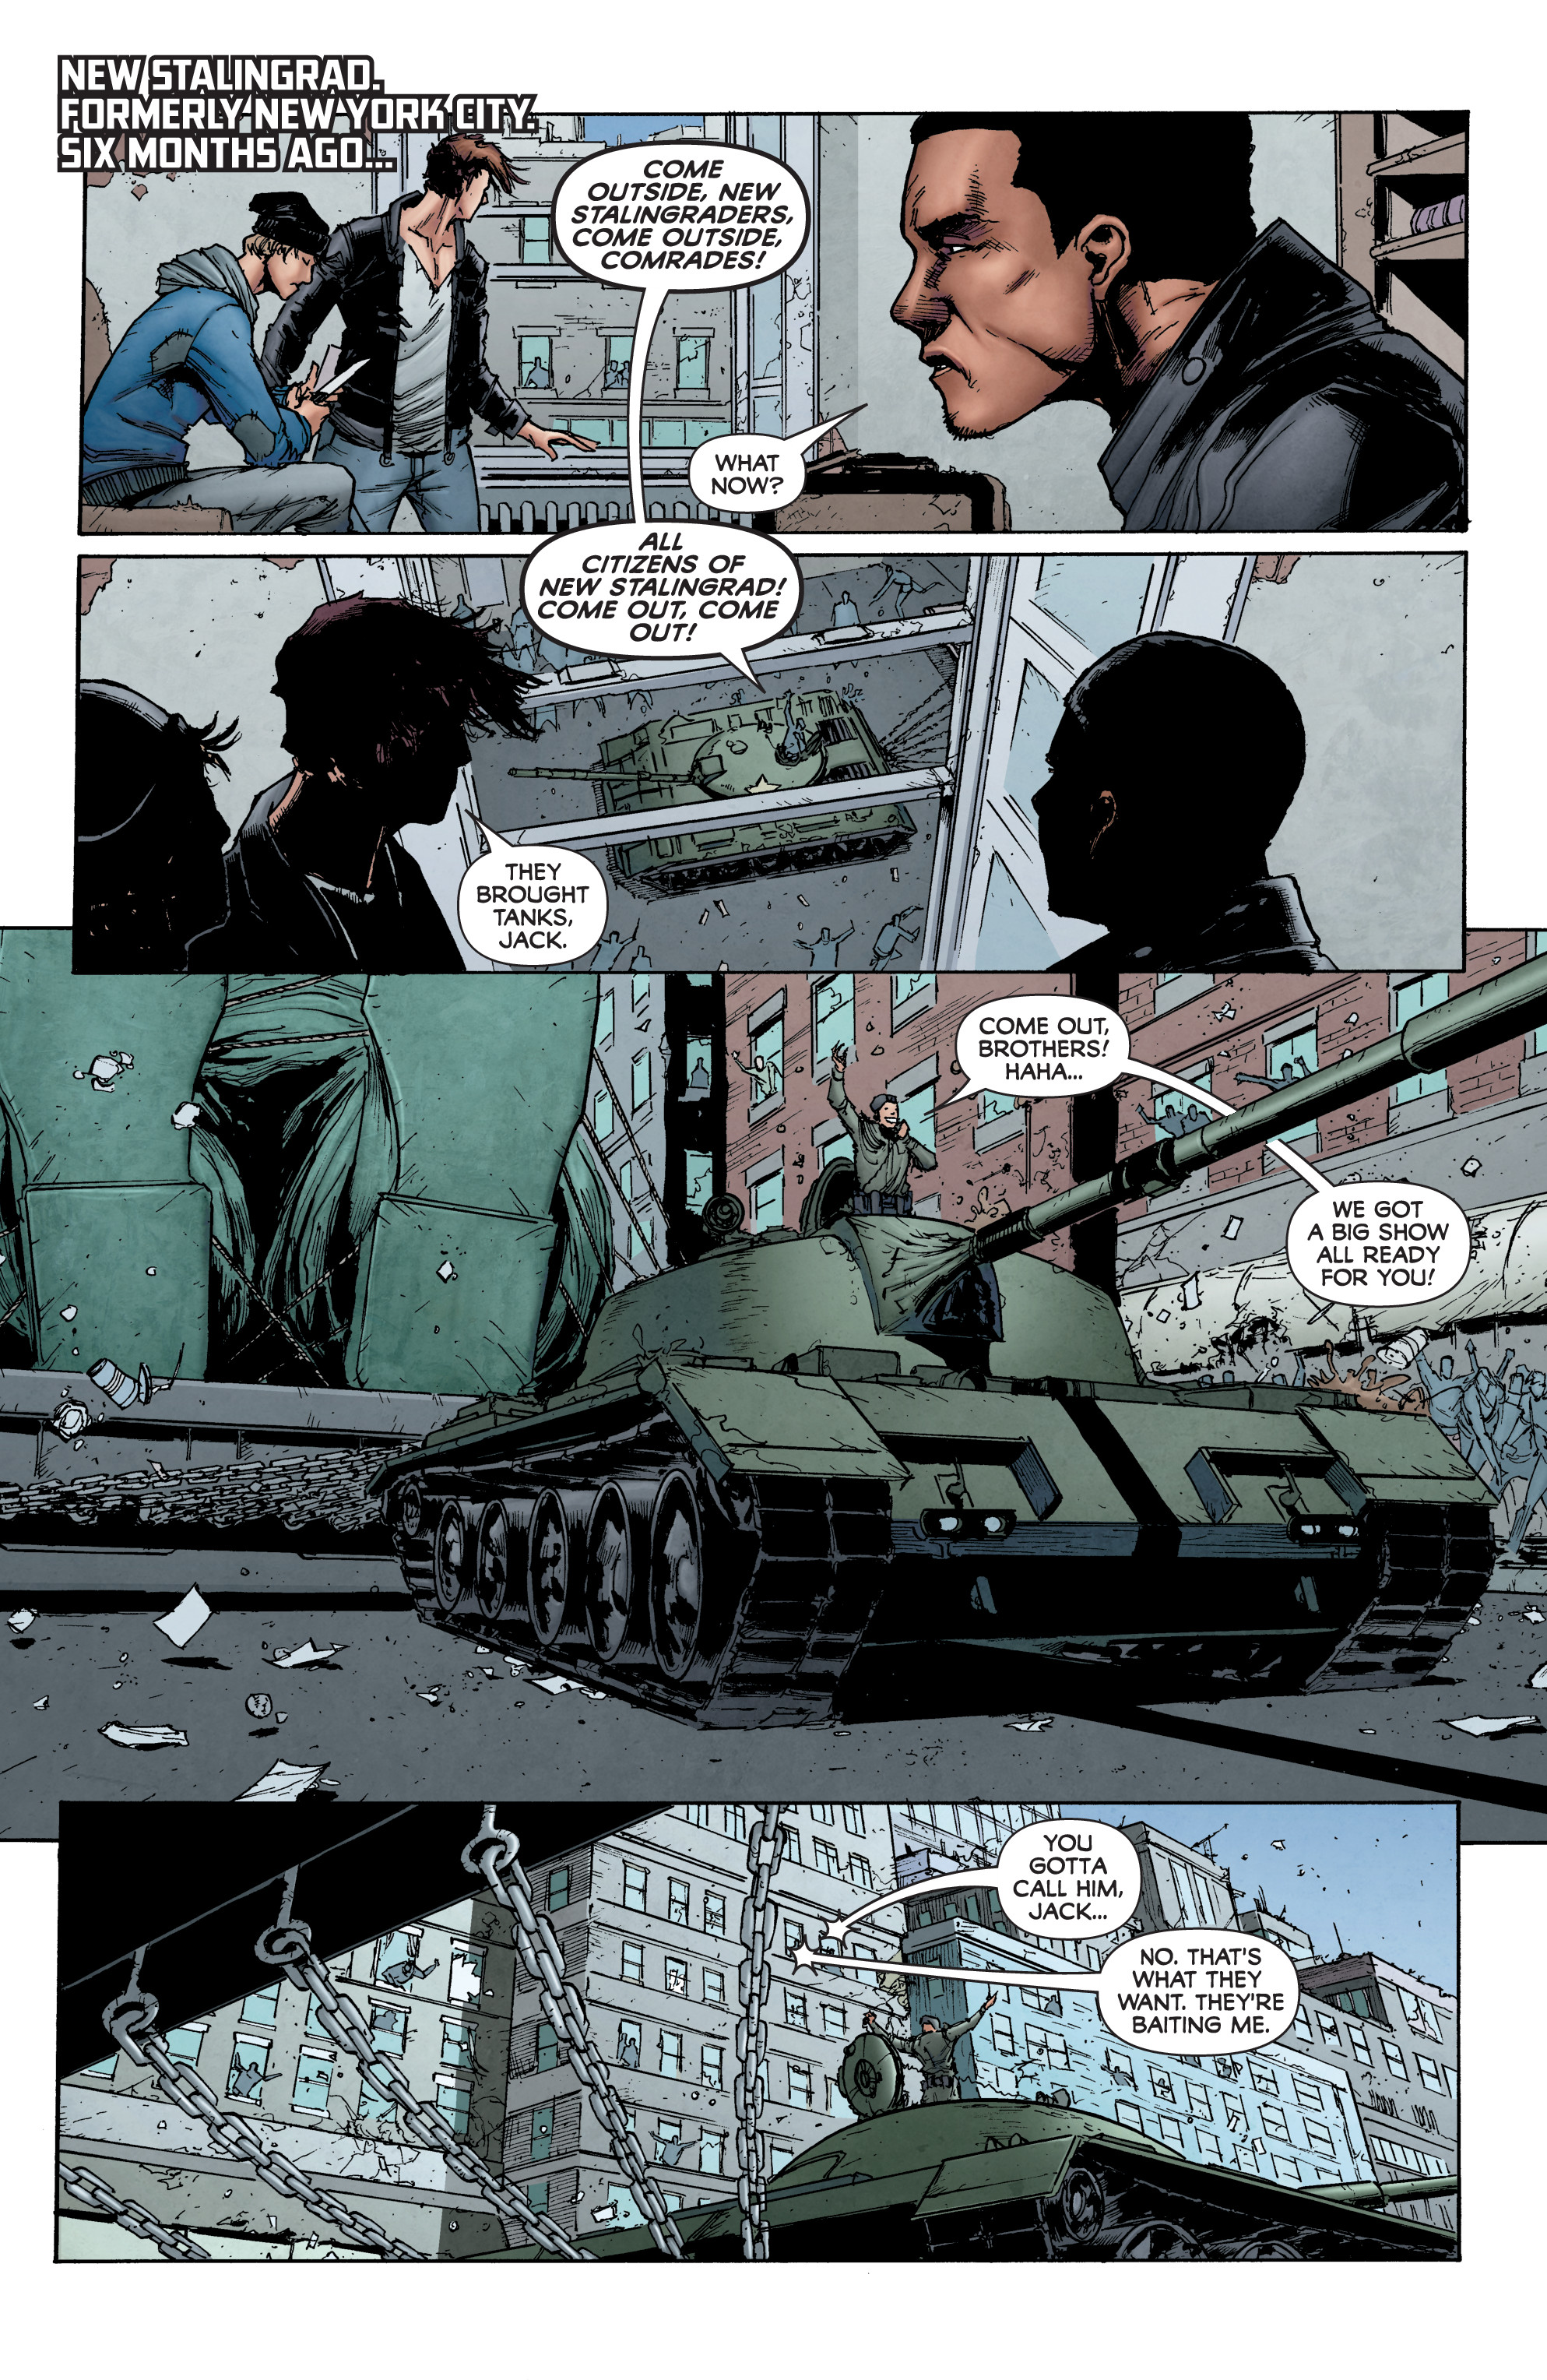 Divinity III: Shadowman and the Battle for New Stalingrad: Chapter 1 - Page 3